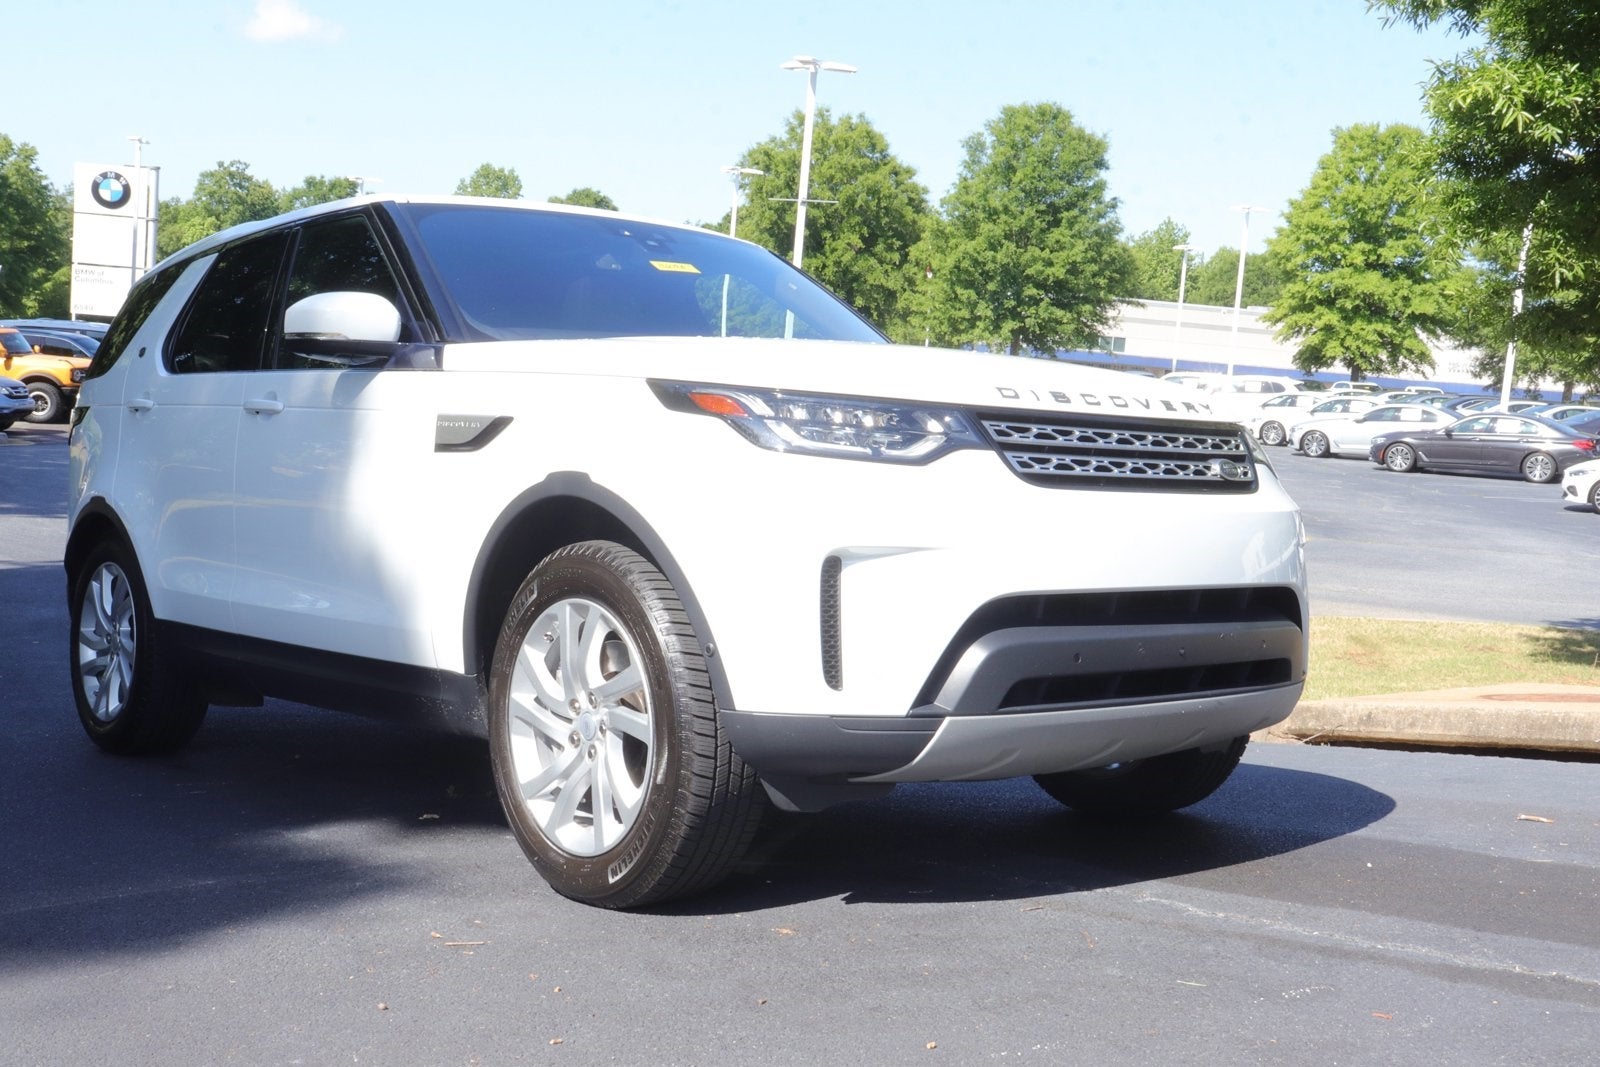 2018 Land Rover Discovery HSE